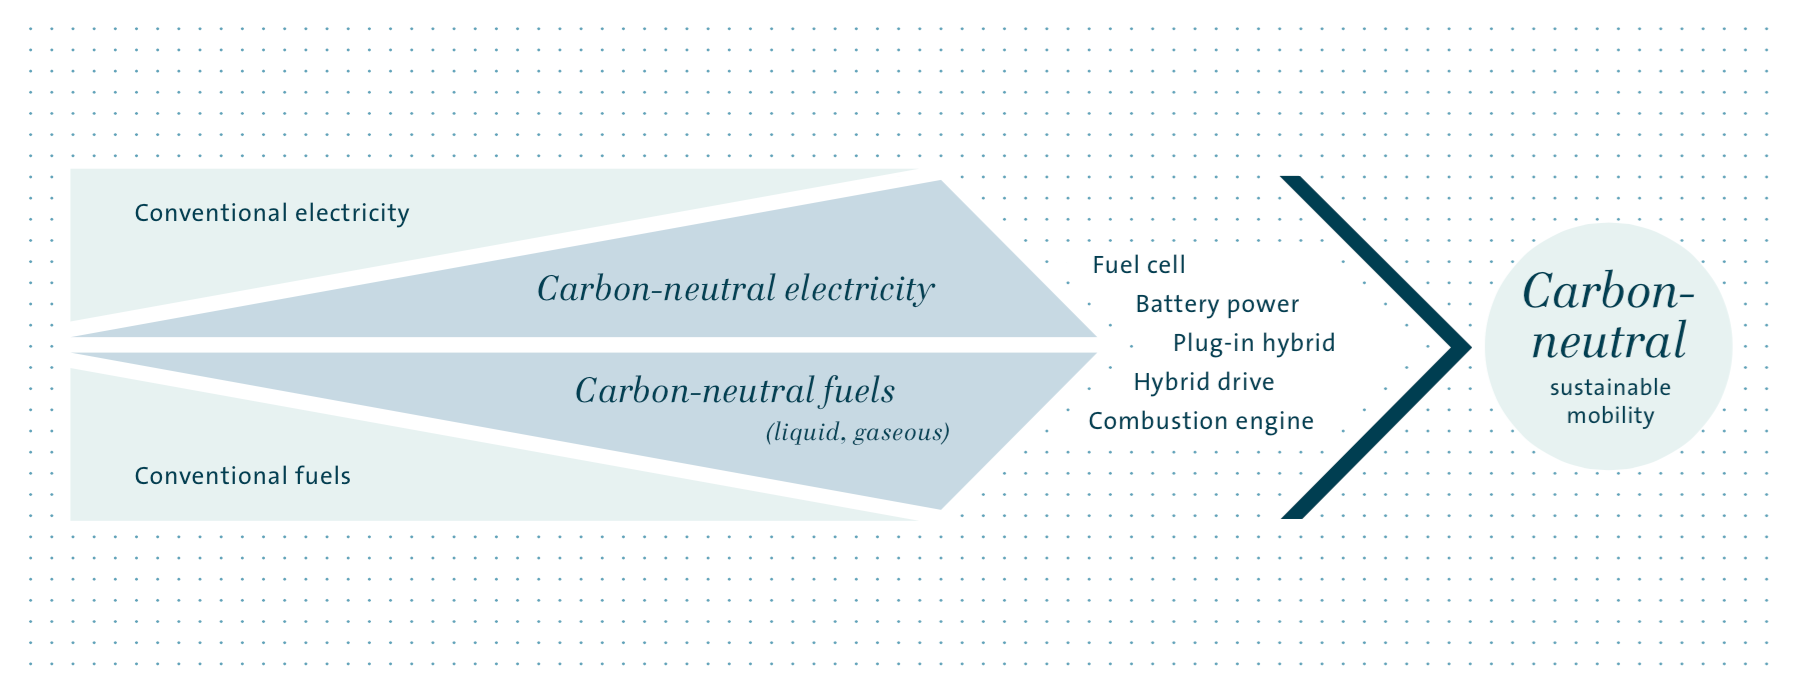 The road to carbon-neutral mobility (graphic)